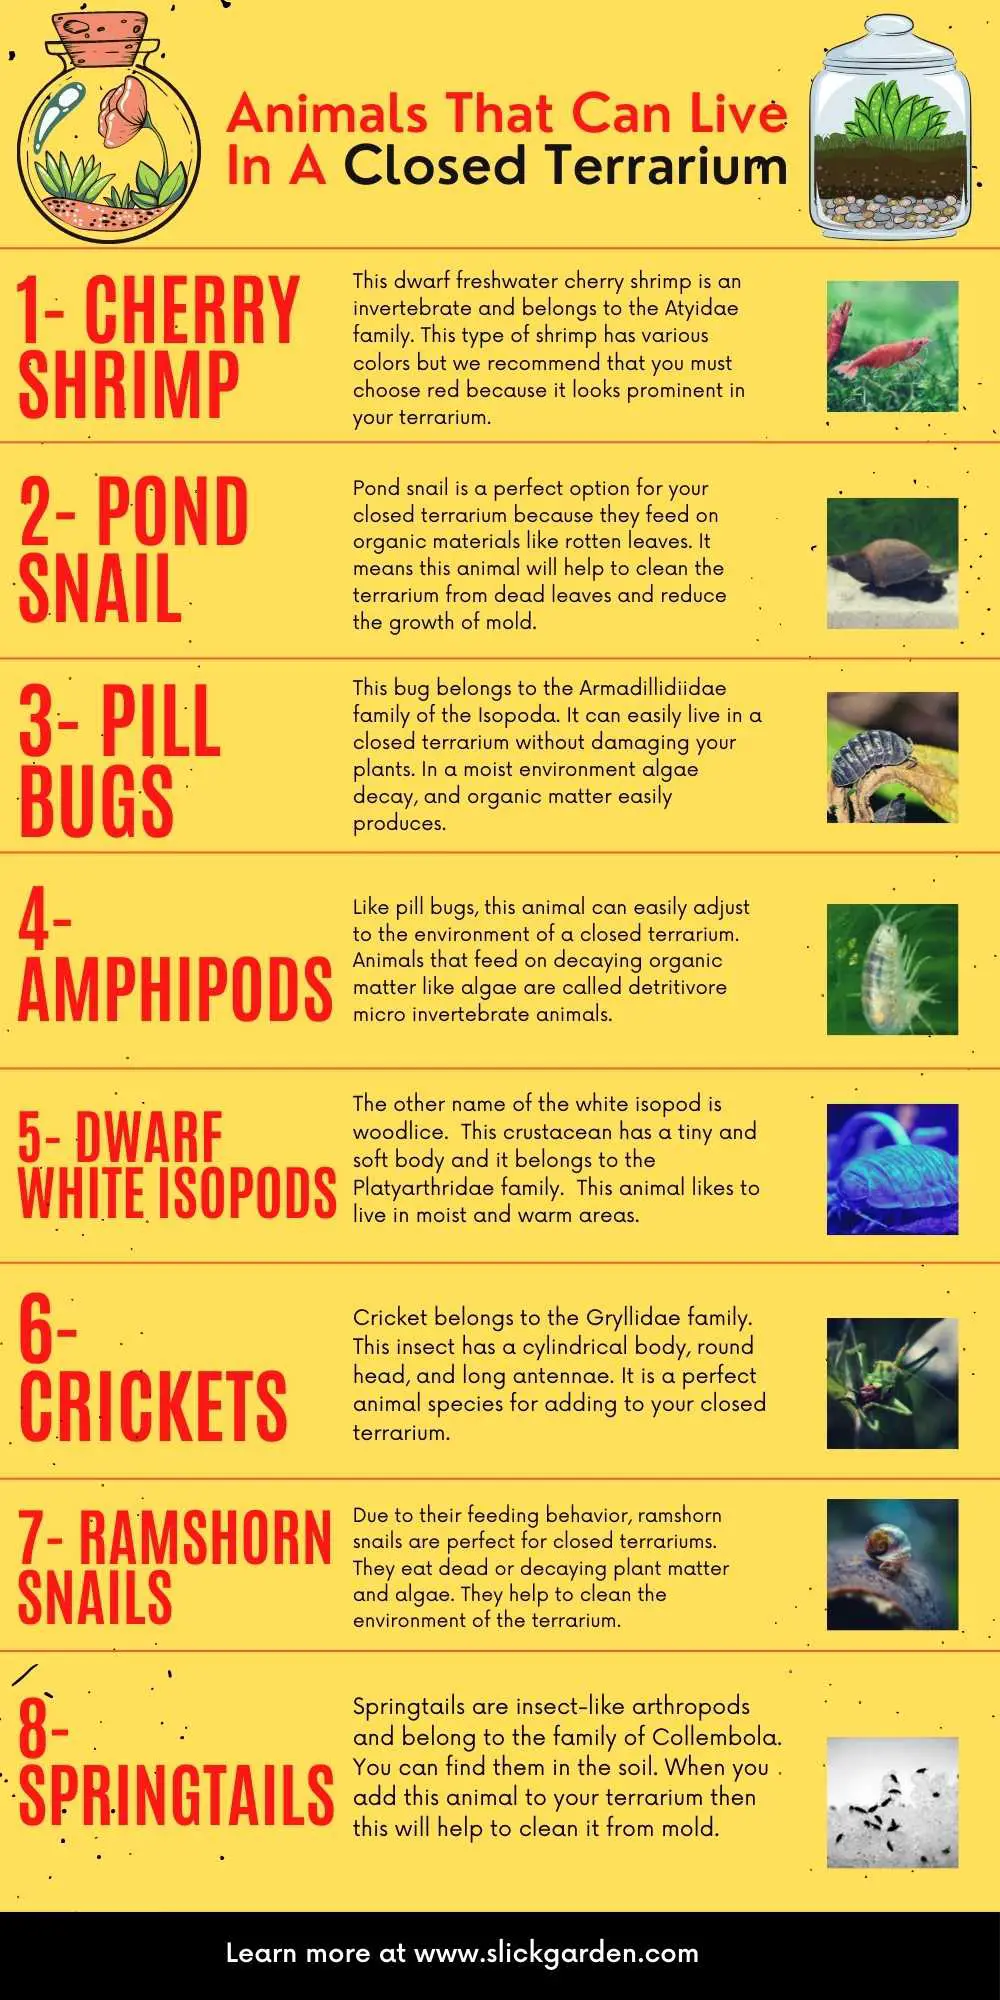 Animals That Can Live In A Closed Terrarium - infographic